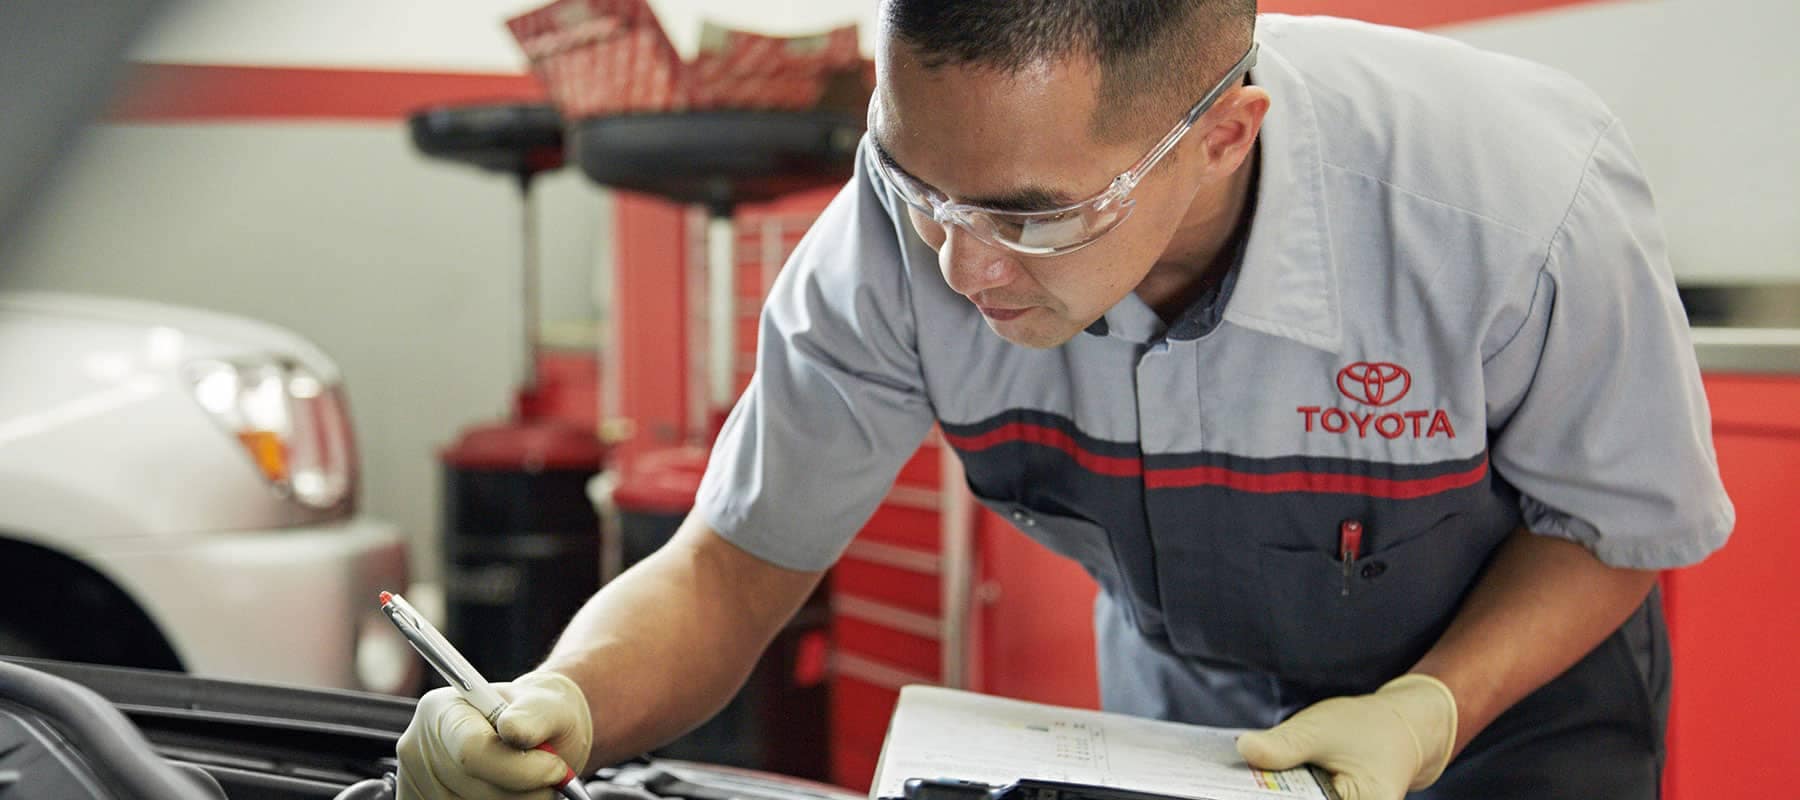 Toyota service technician holding a clipboard and inspecting a car engine